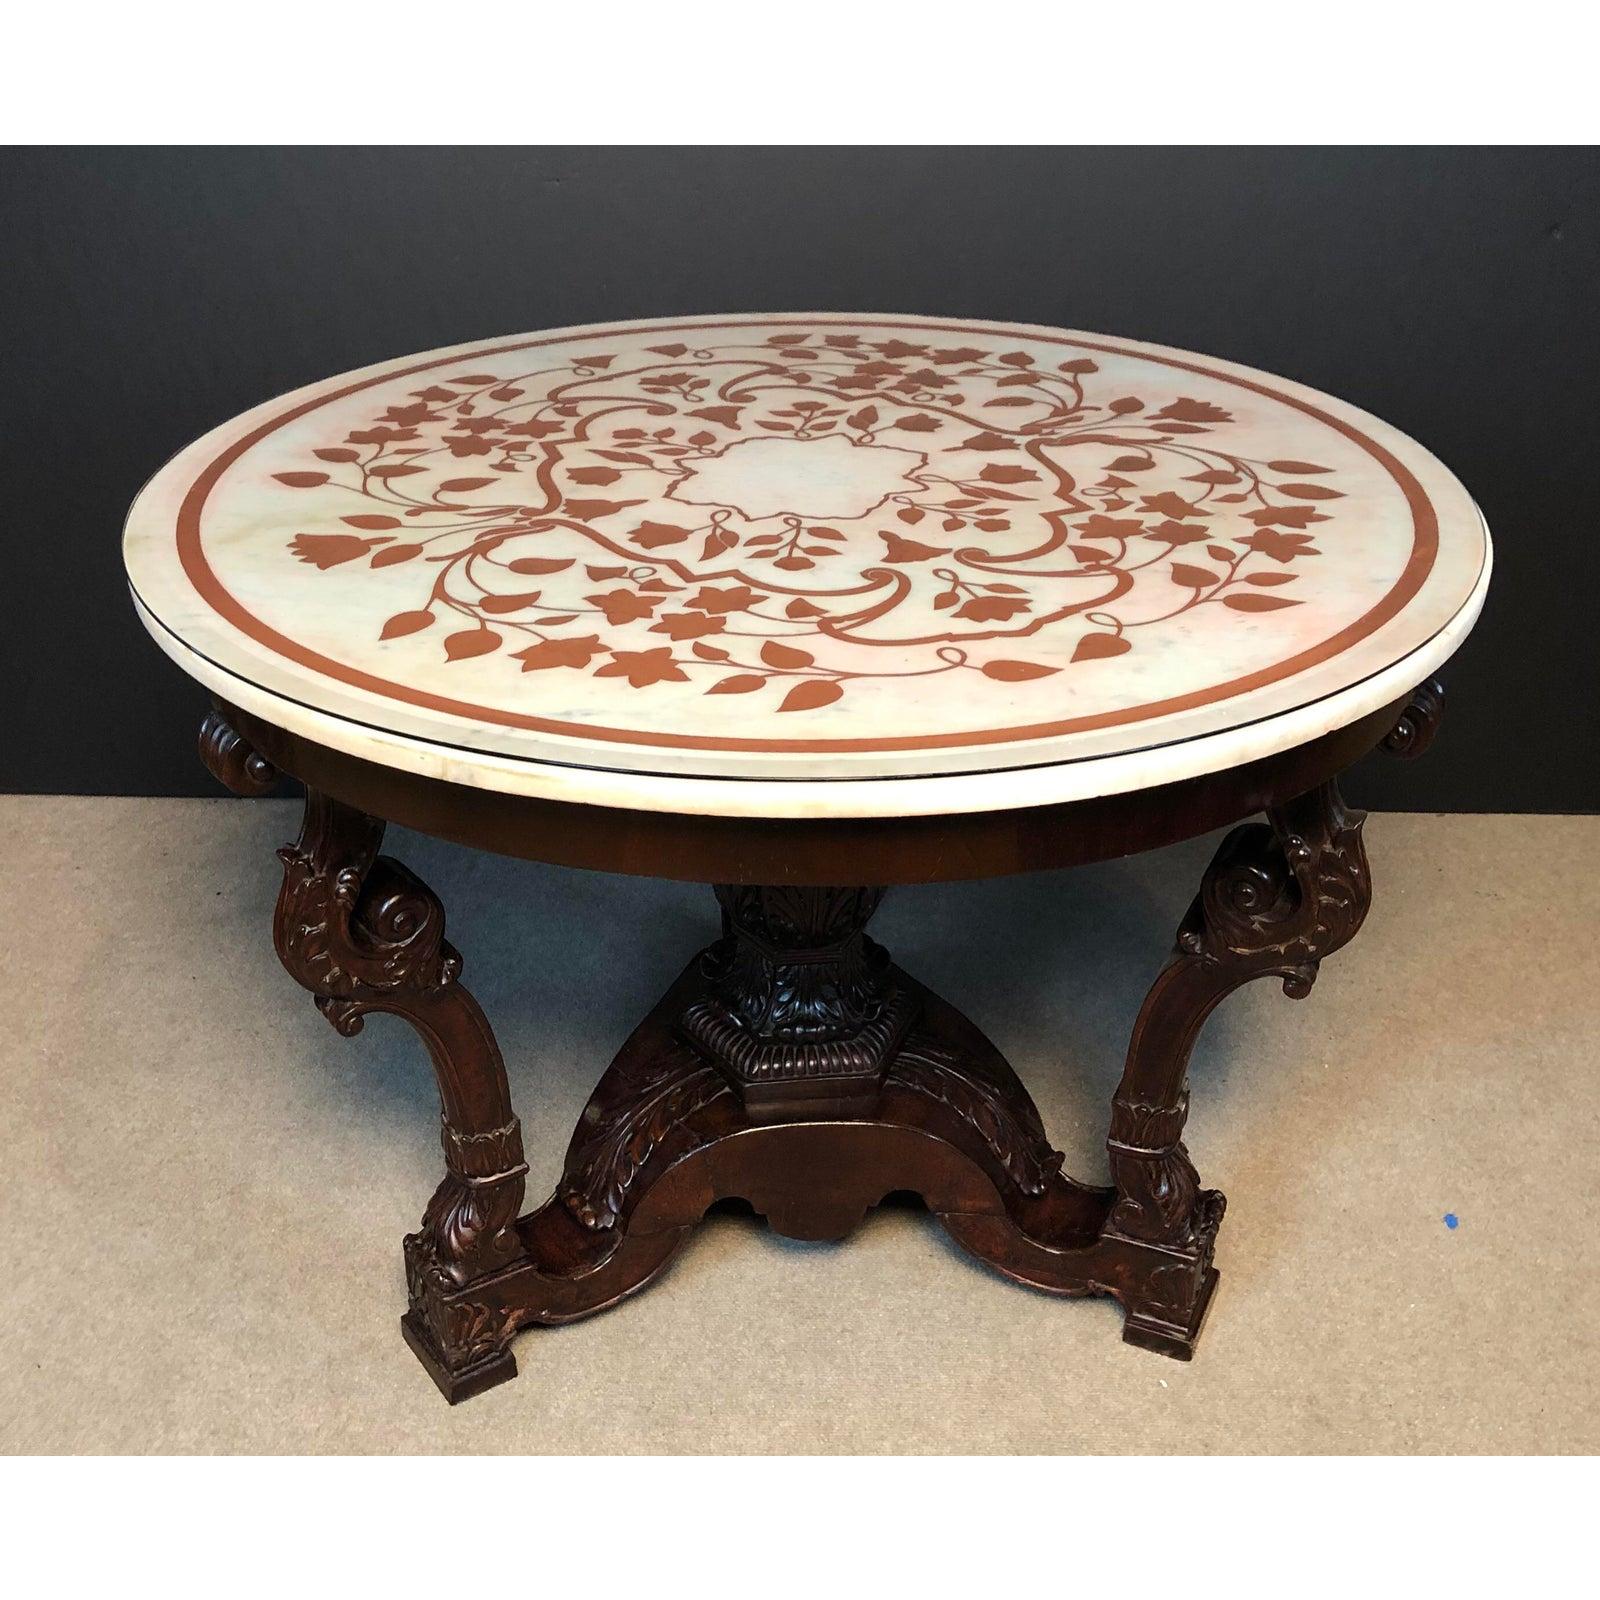 Mid-19th Century Italian Scagliola White Marble-Top Carved Wood Center Table, 19th Century 